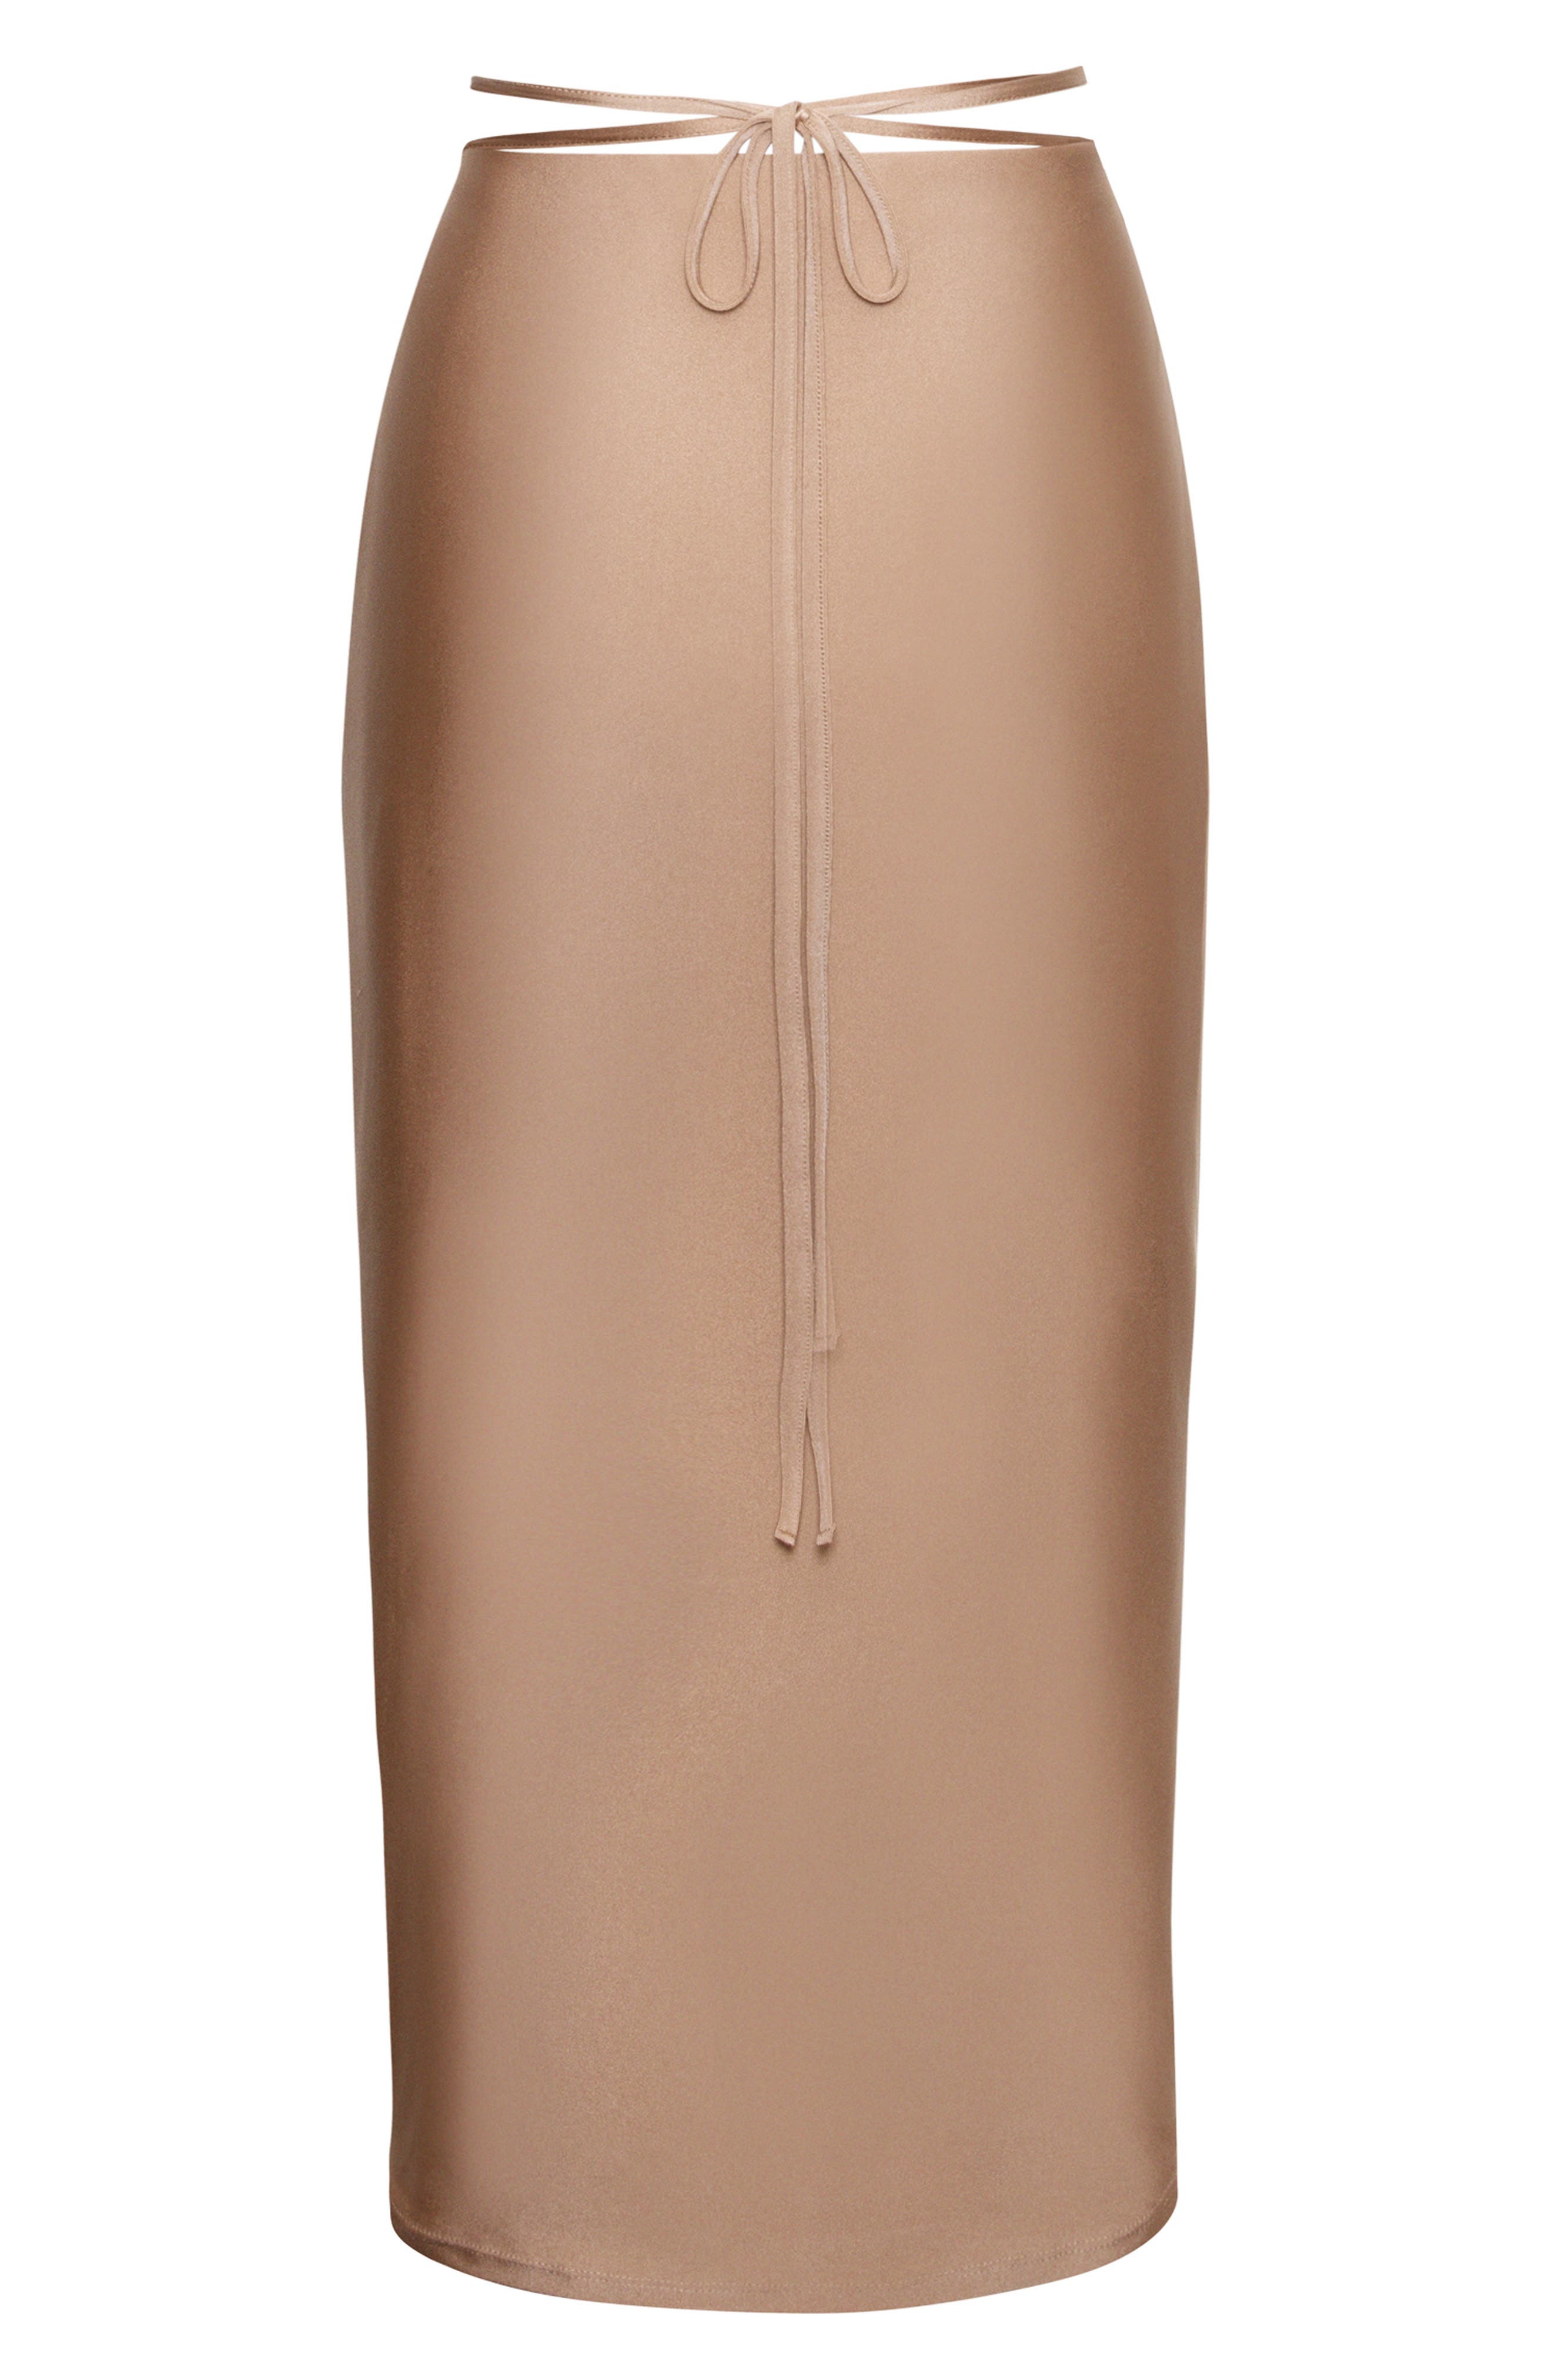 Afrm Saoirse Knit Pencil Skirt In Sienna